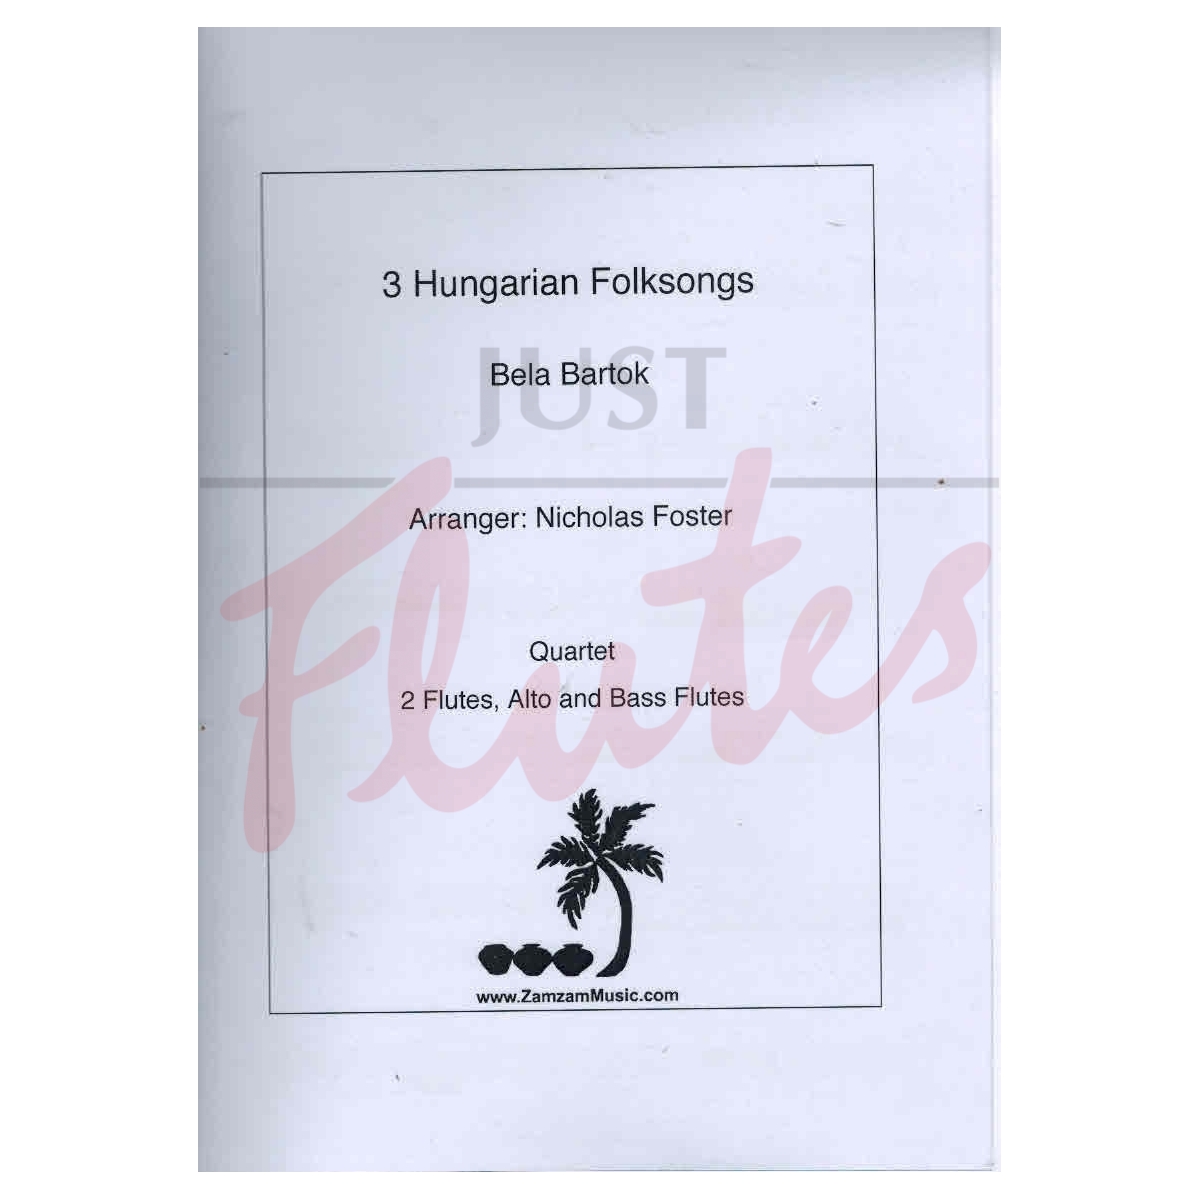 3 Hungarian Folksongs from Csik